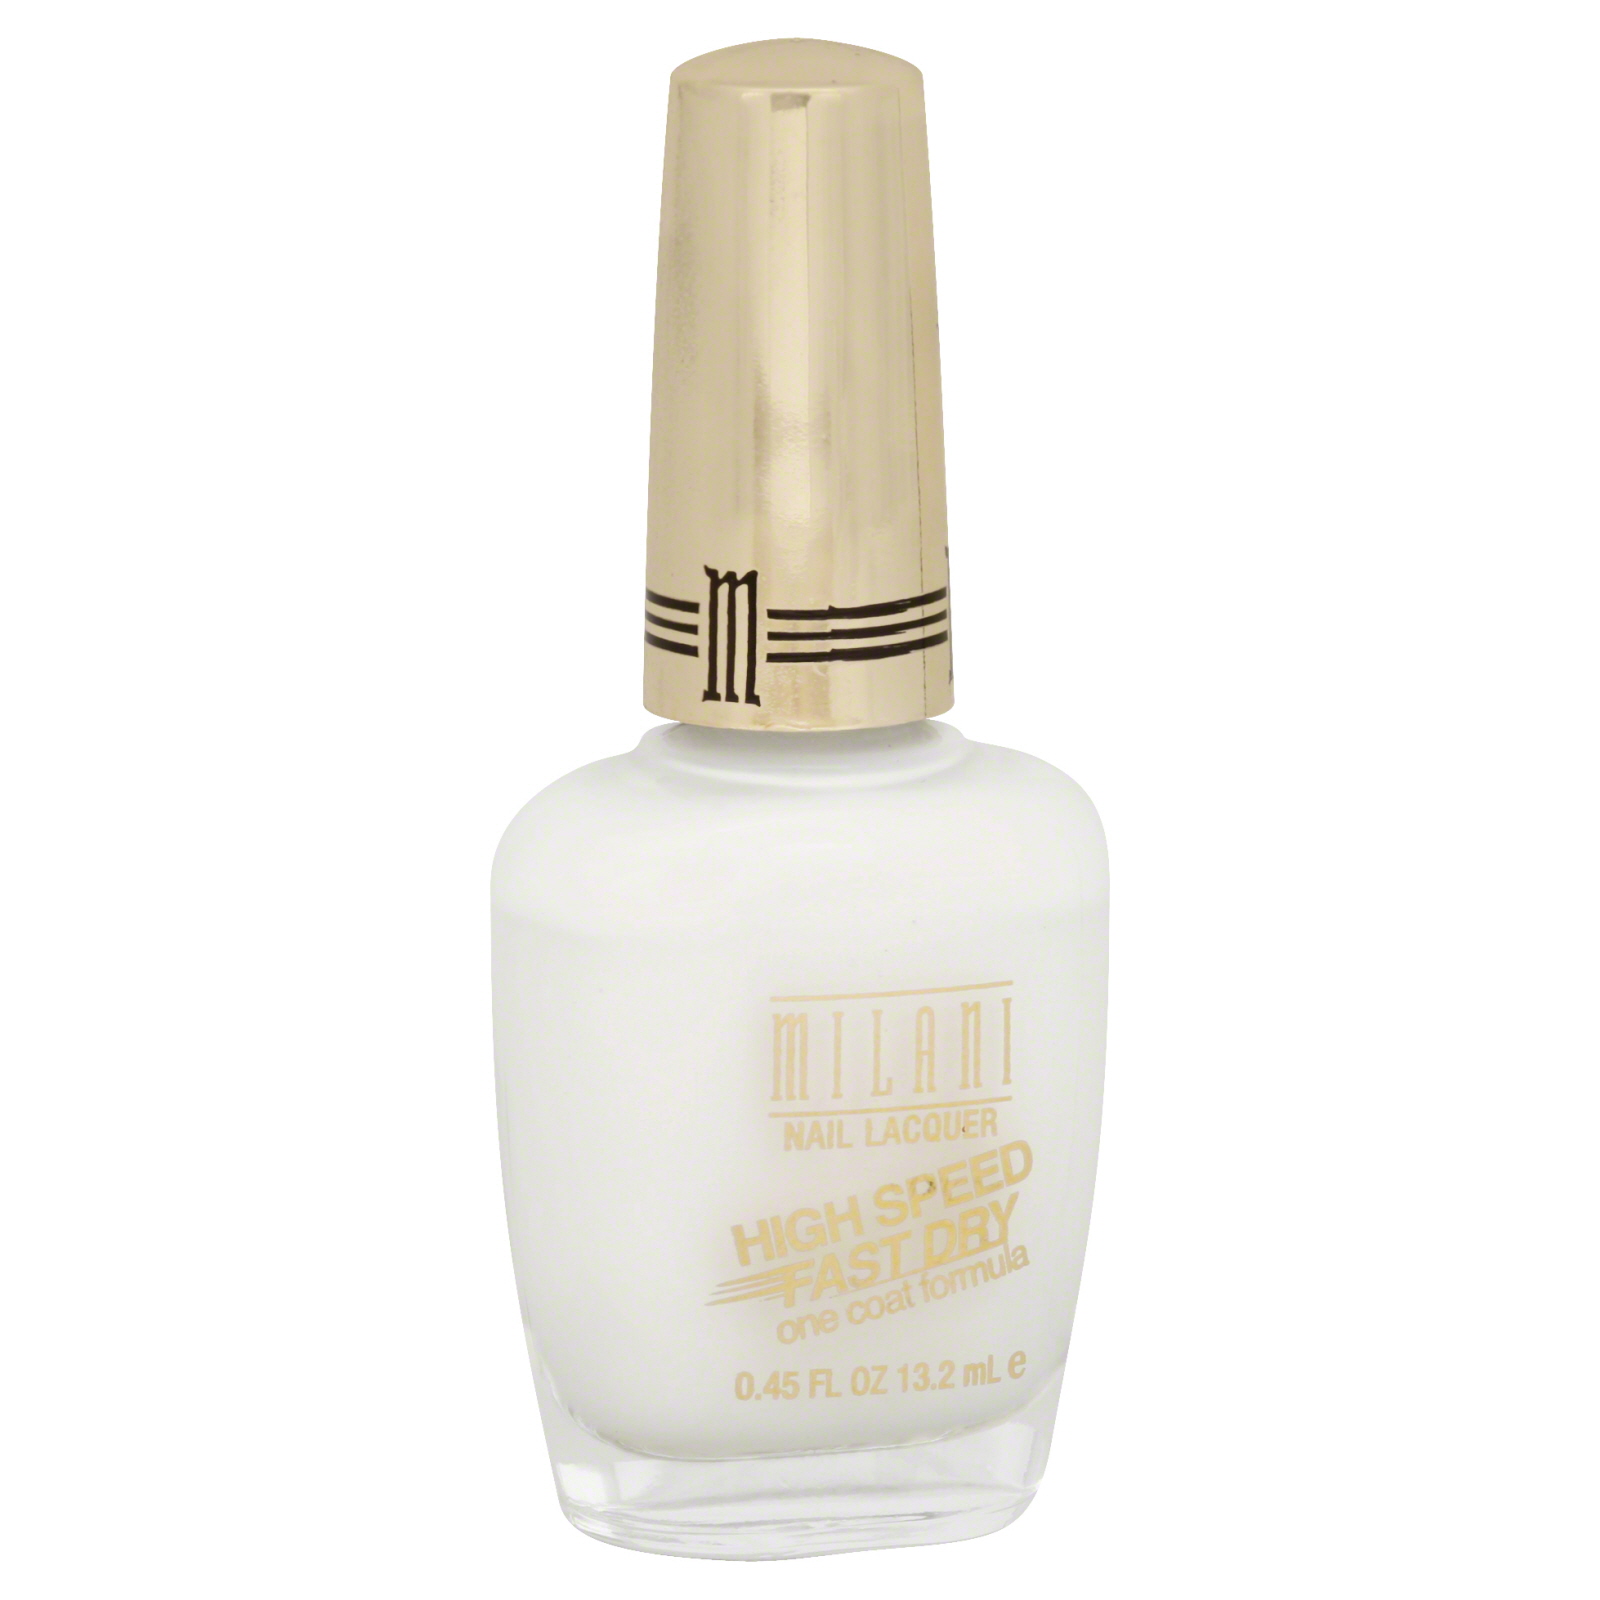 Milani High Speed Fast Dry Nail Lacquer White On The Spot .45 fl oz